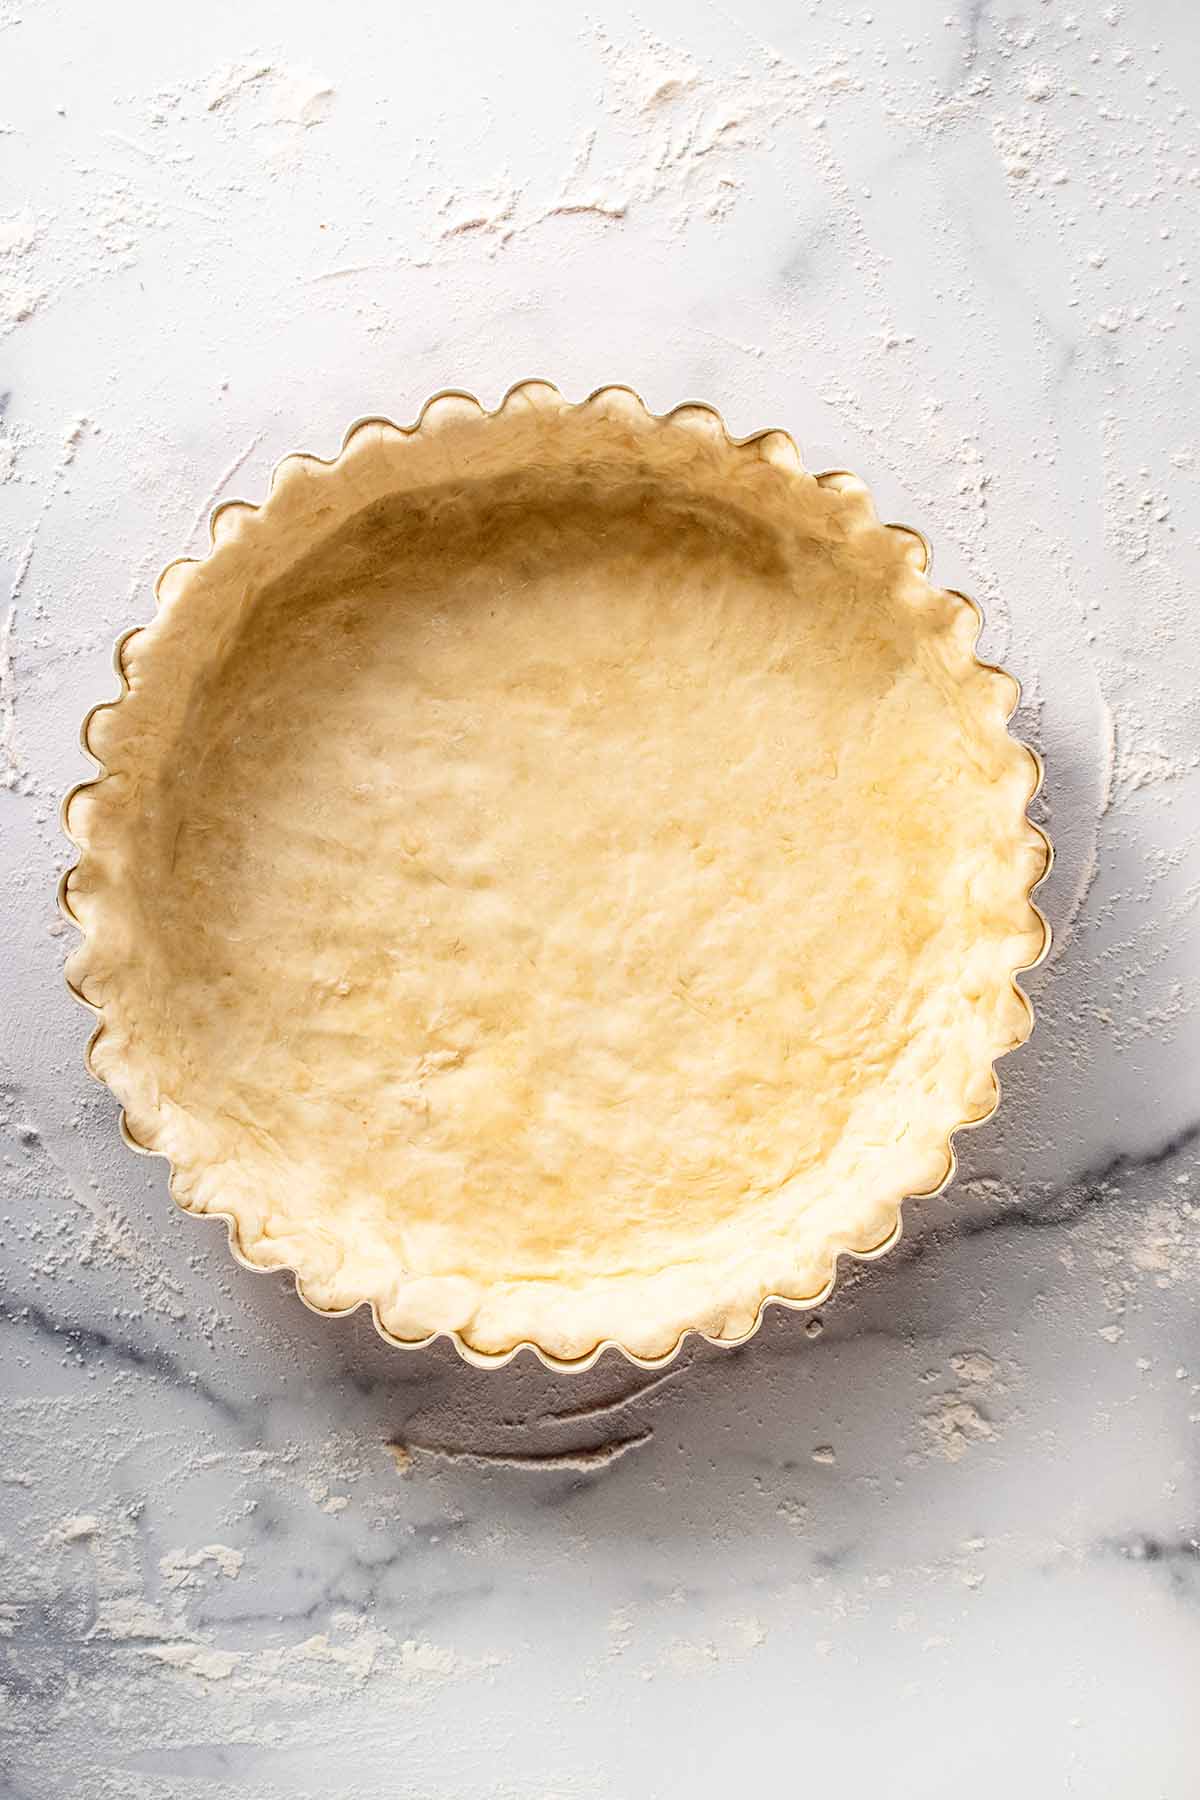 Raw crust dough in a tart pan with ends folded over inside the sides of the pan and pressed to fit.